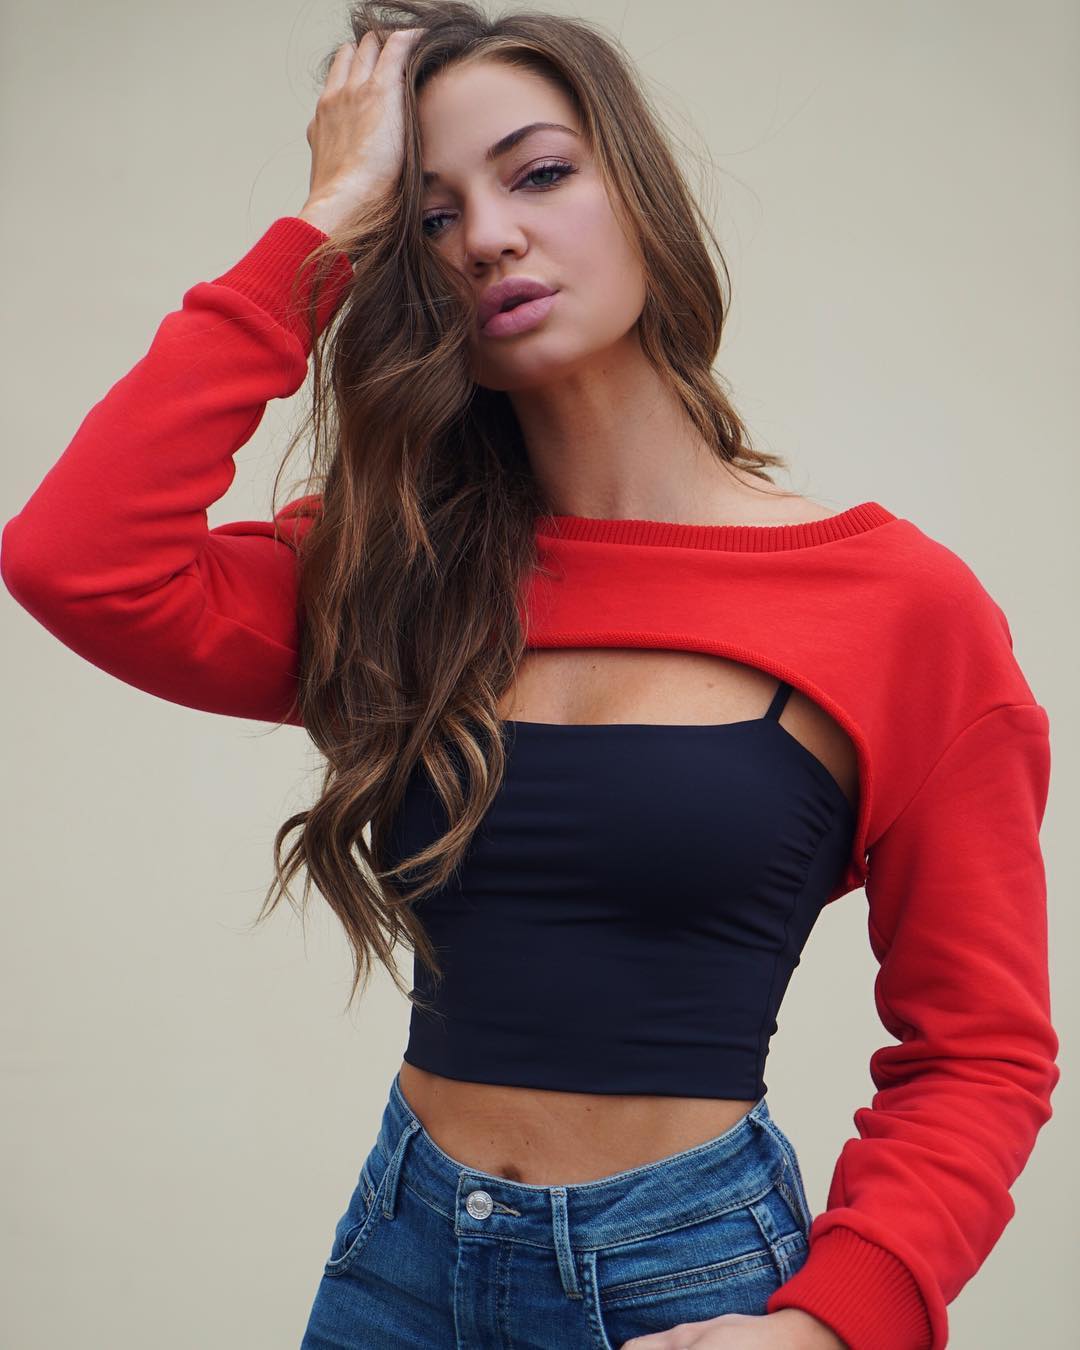 Erika Costell Sexy Pictures 86 Pics The Girl Girl